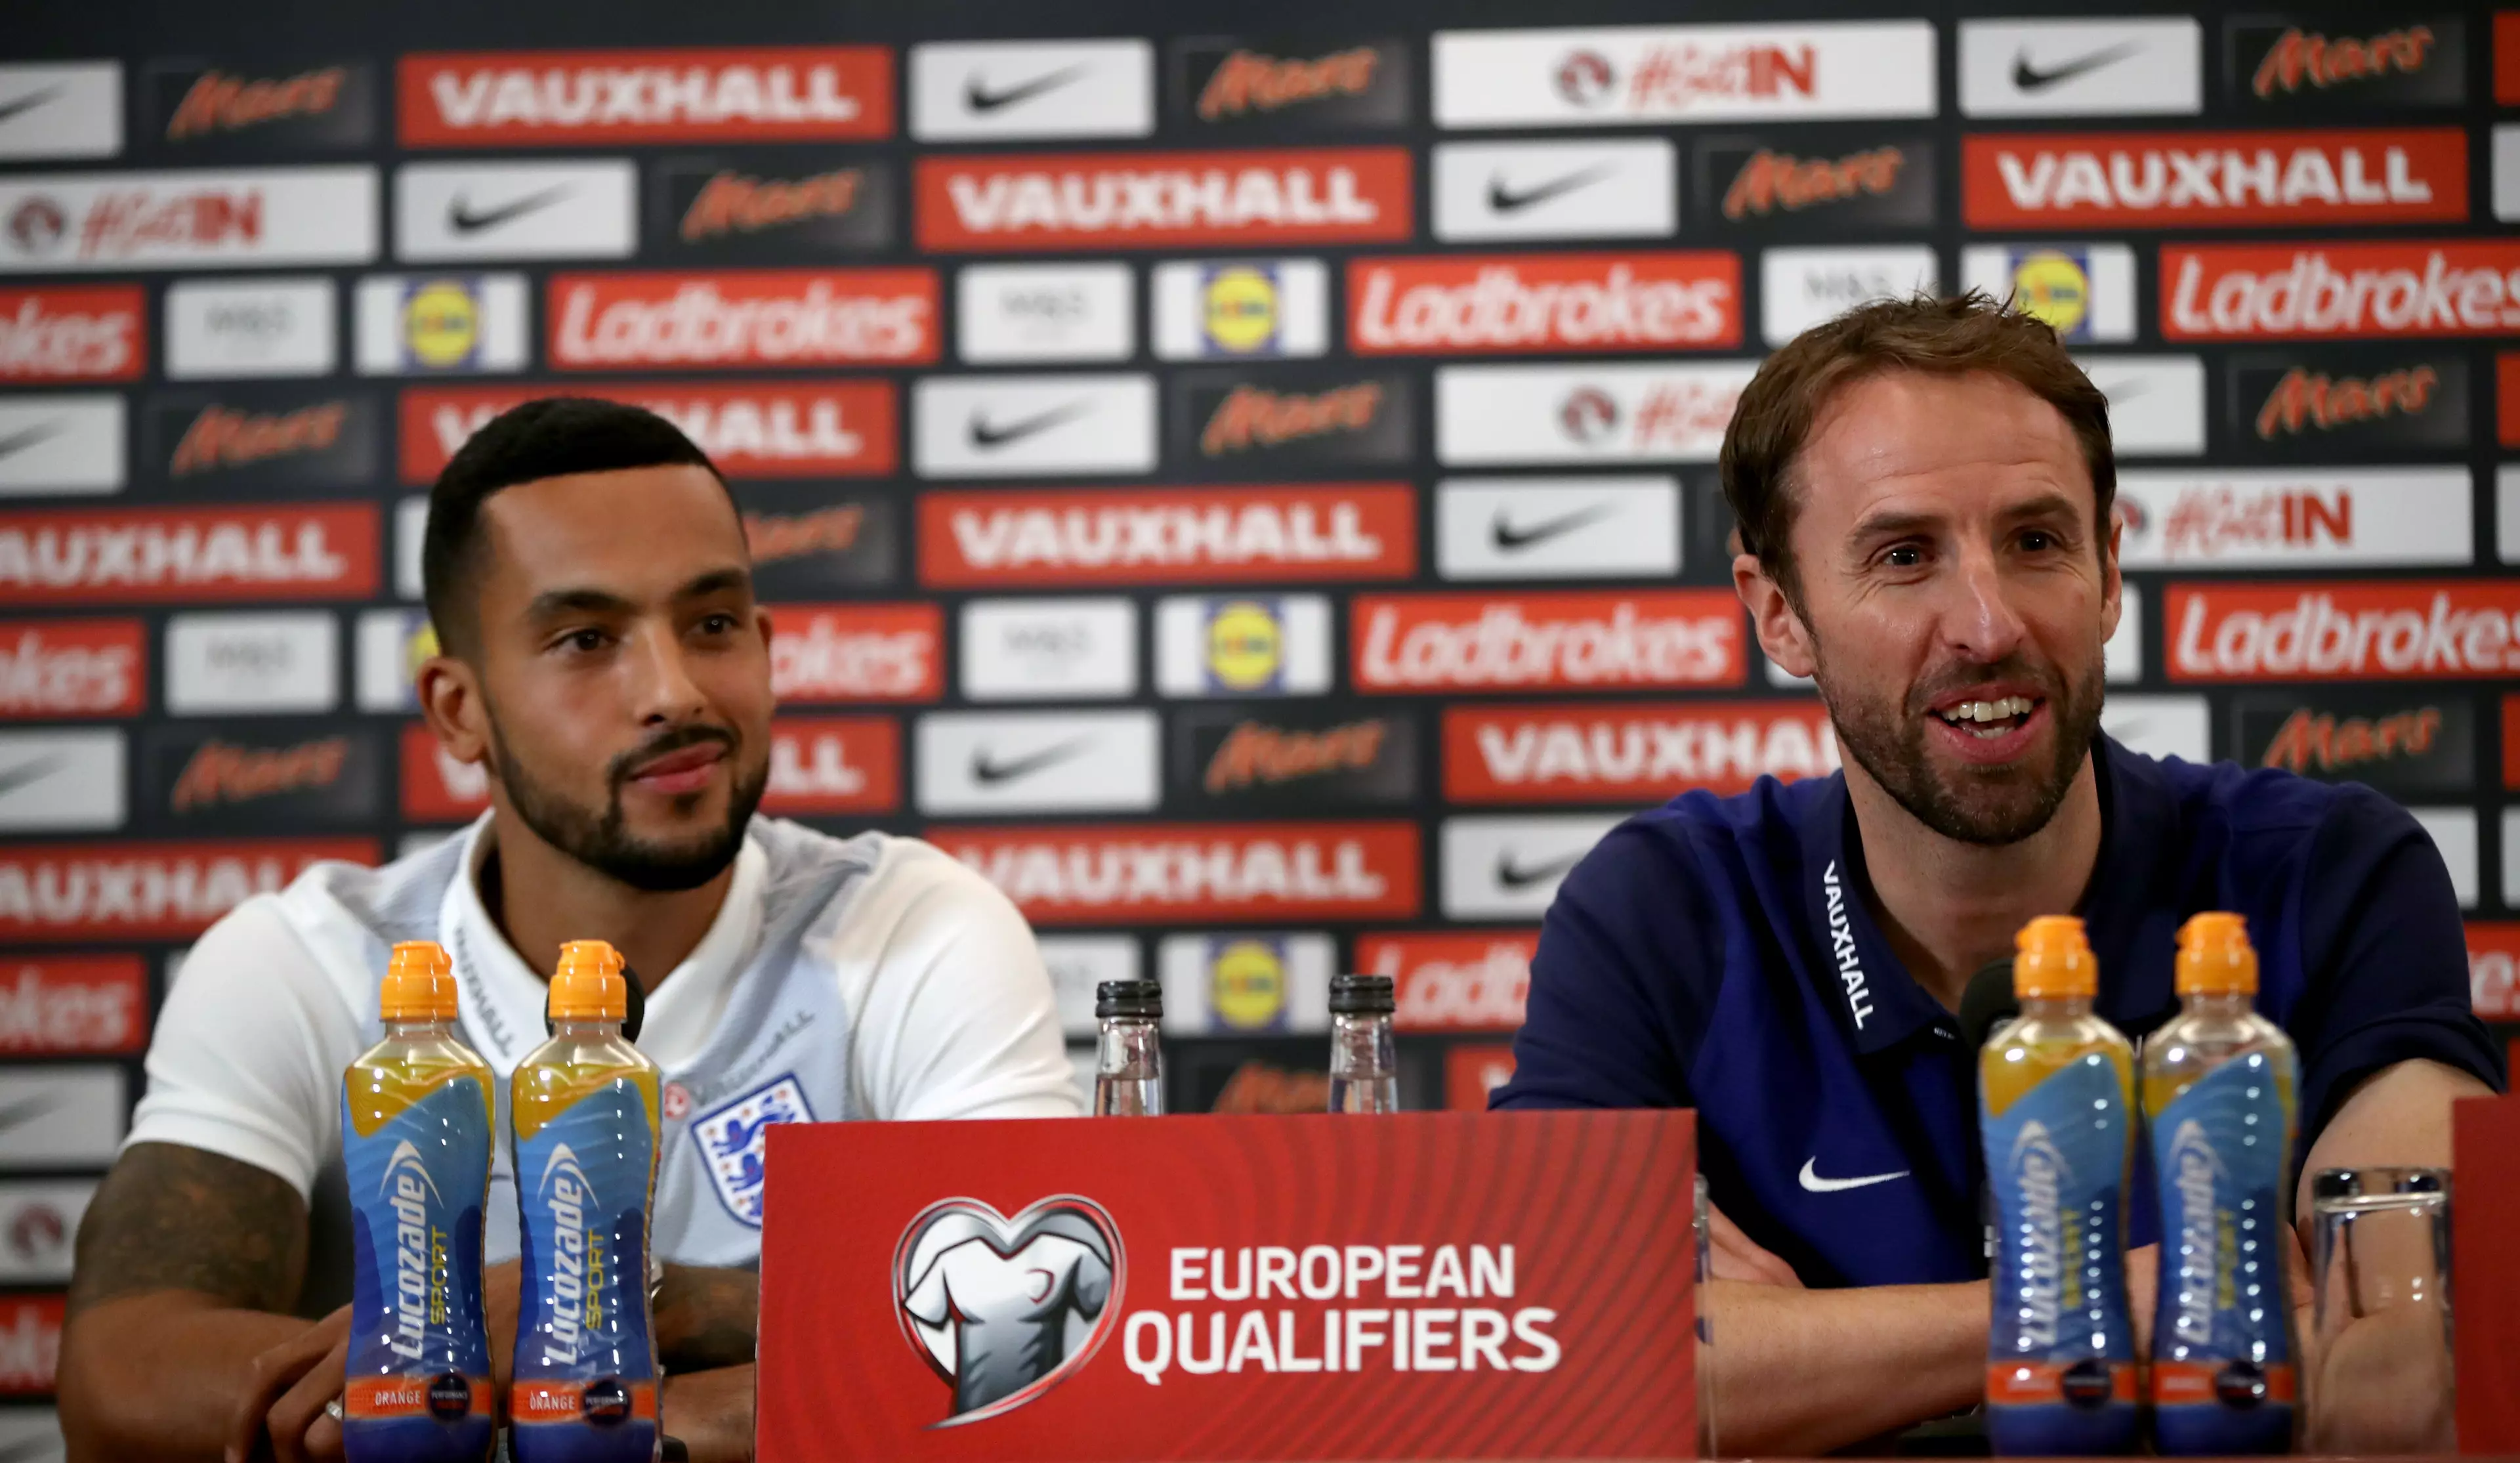 Gareth Southgate Confirms That Wayne Rooney And Theo Walcott Will Start Tomorrow